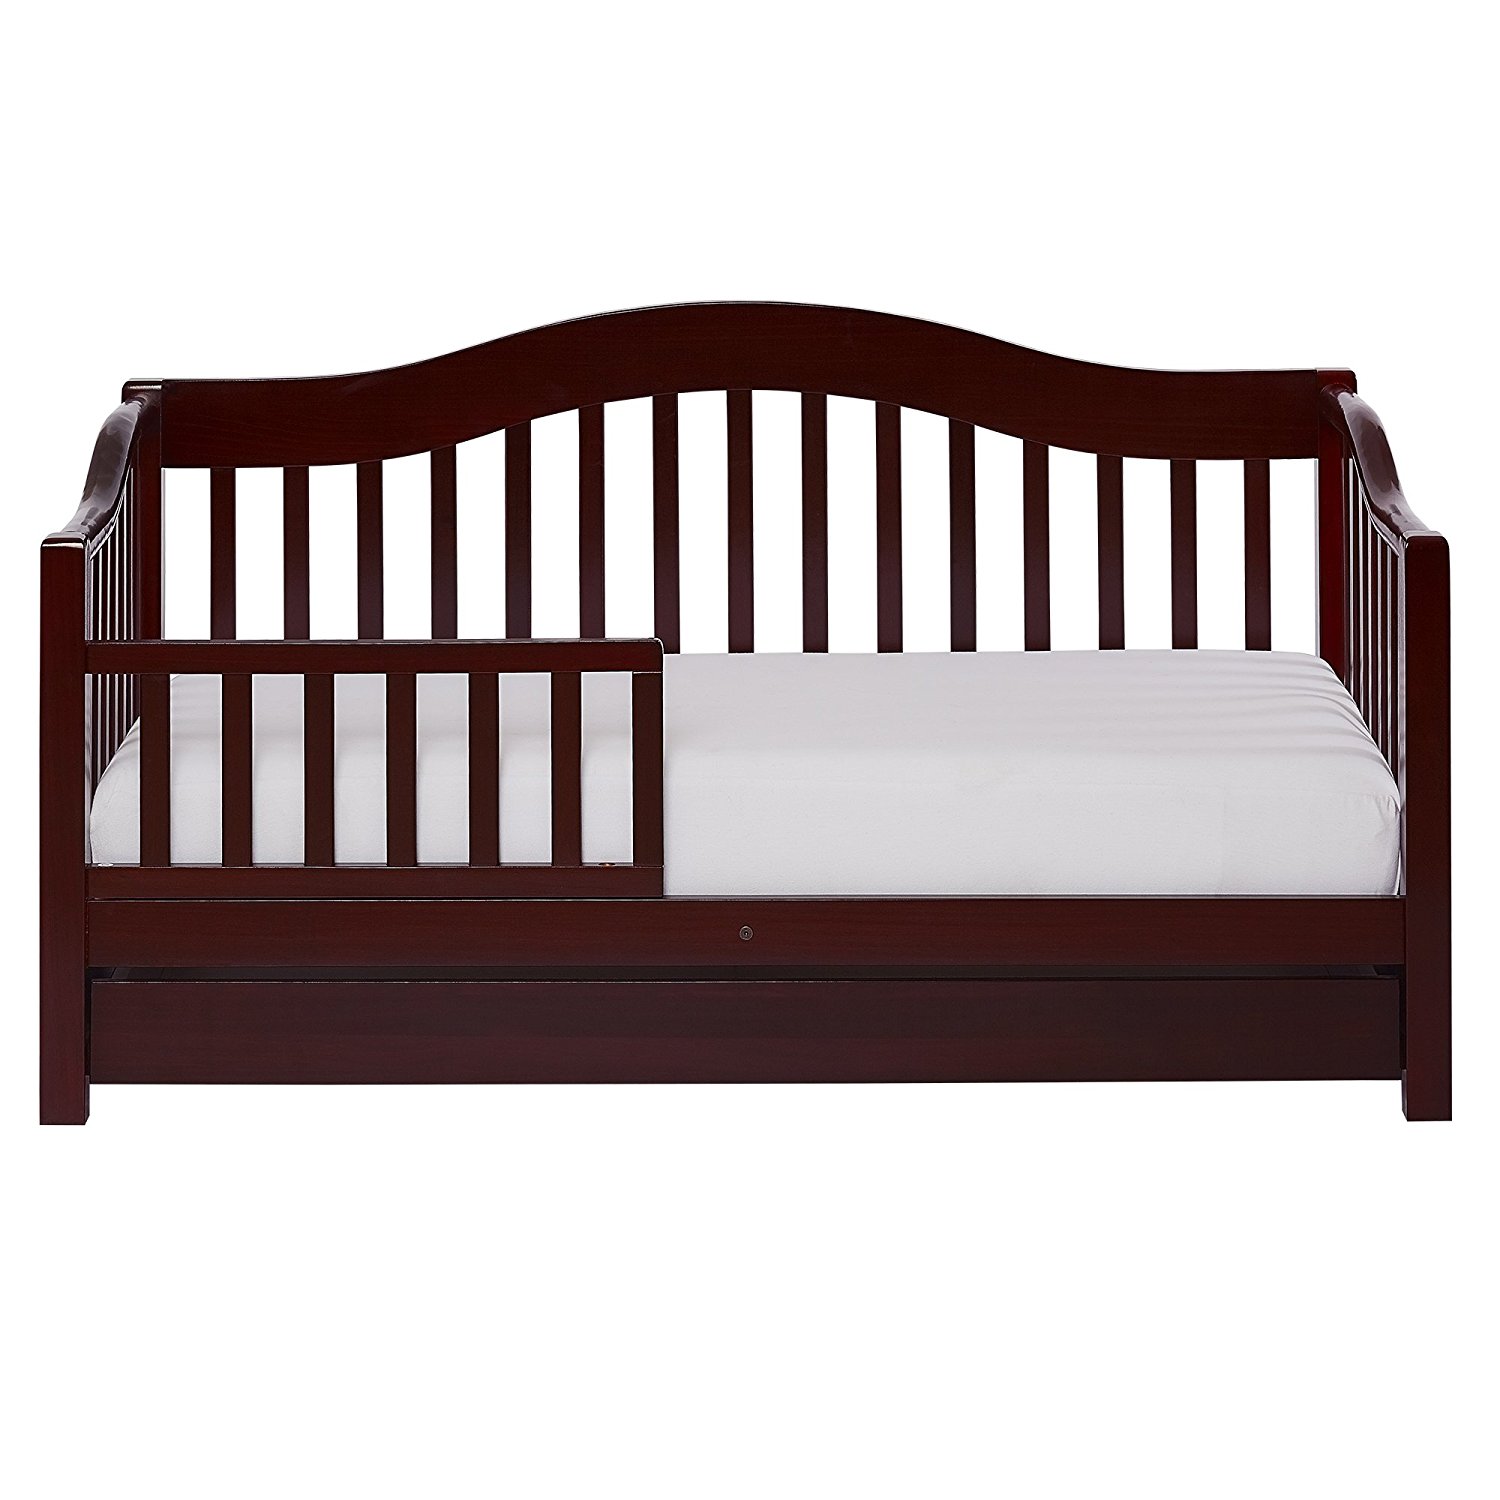 Dream On Me Toddler Day Bed with Storage Drawer, Cherry